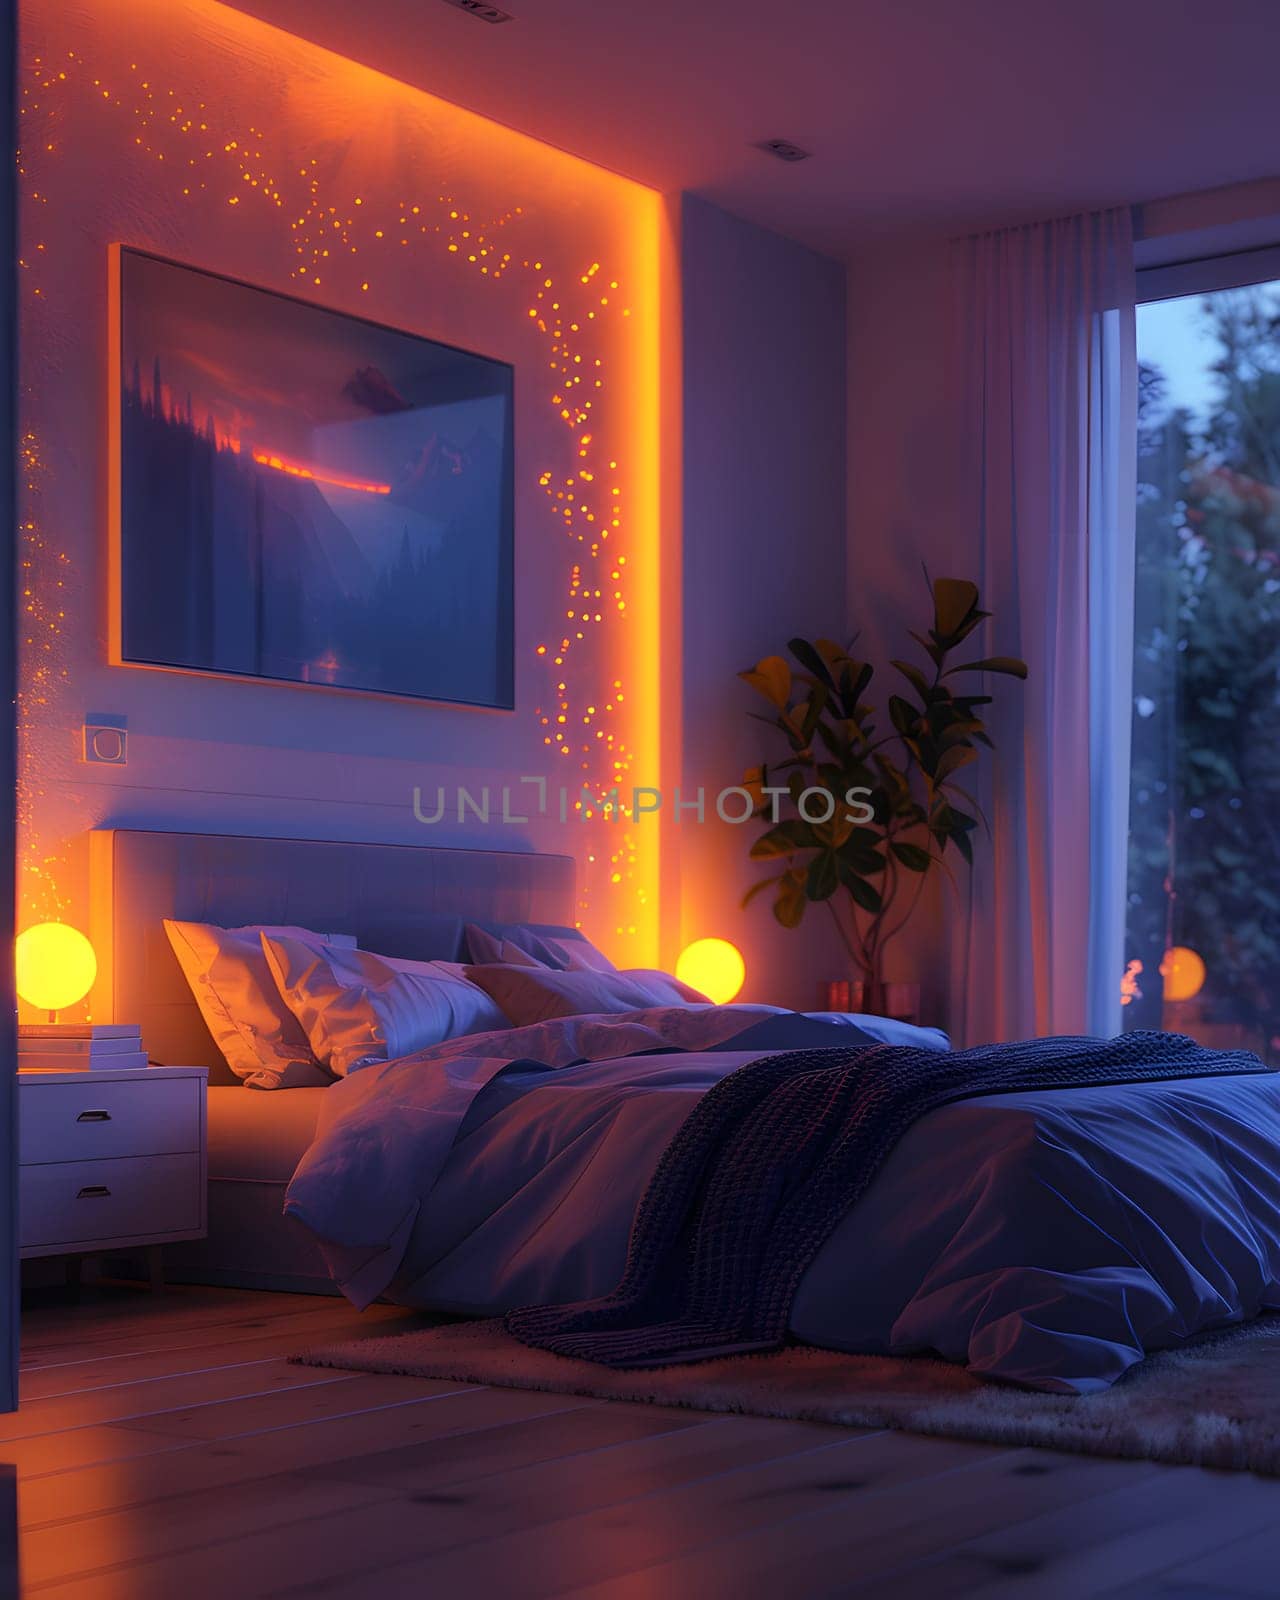 Interior design with bed, nightstand, lamps, and picture on wall in bedroom by Nadtochiy